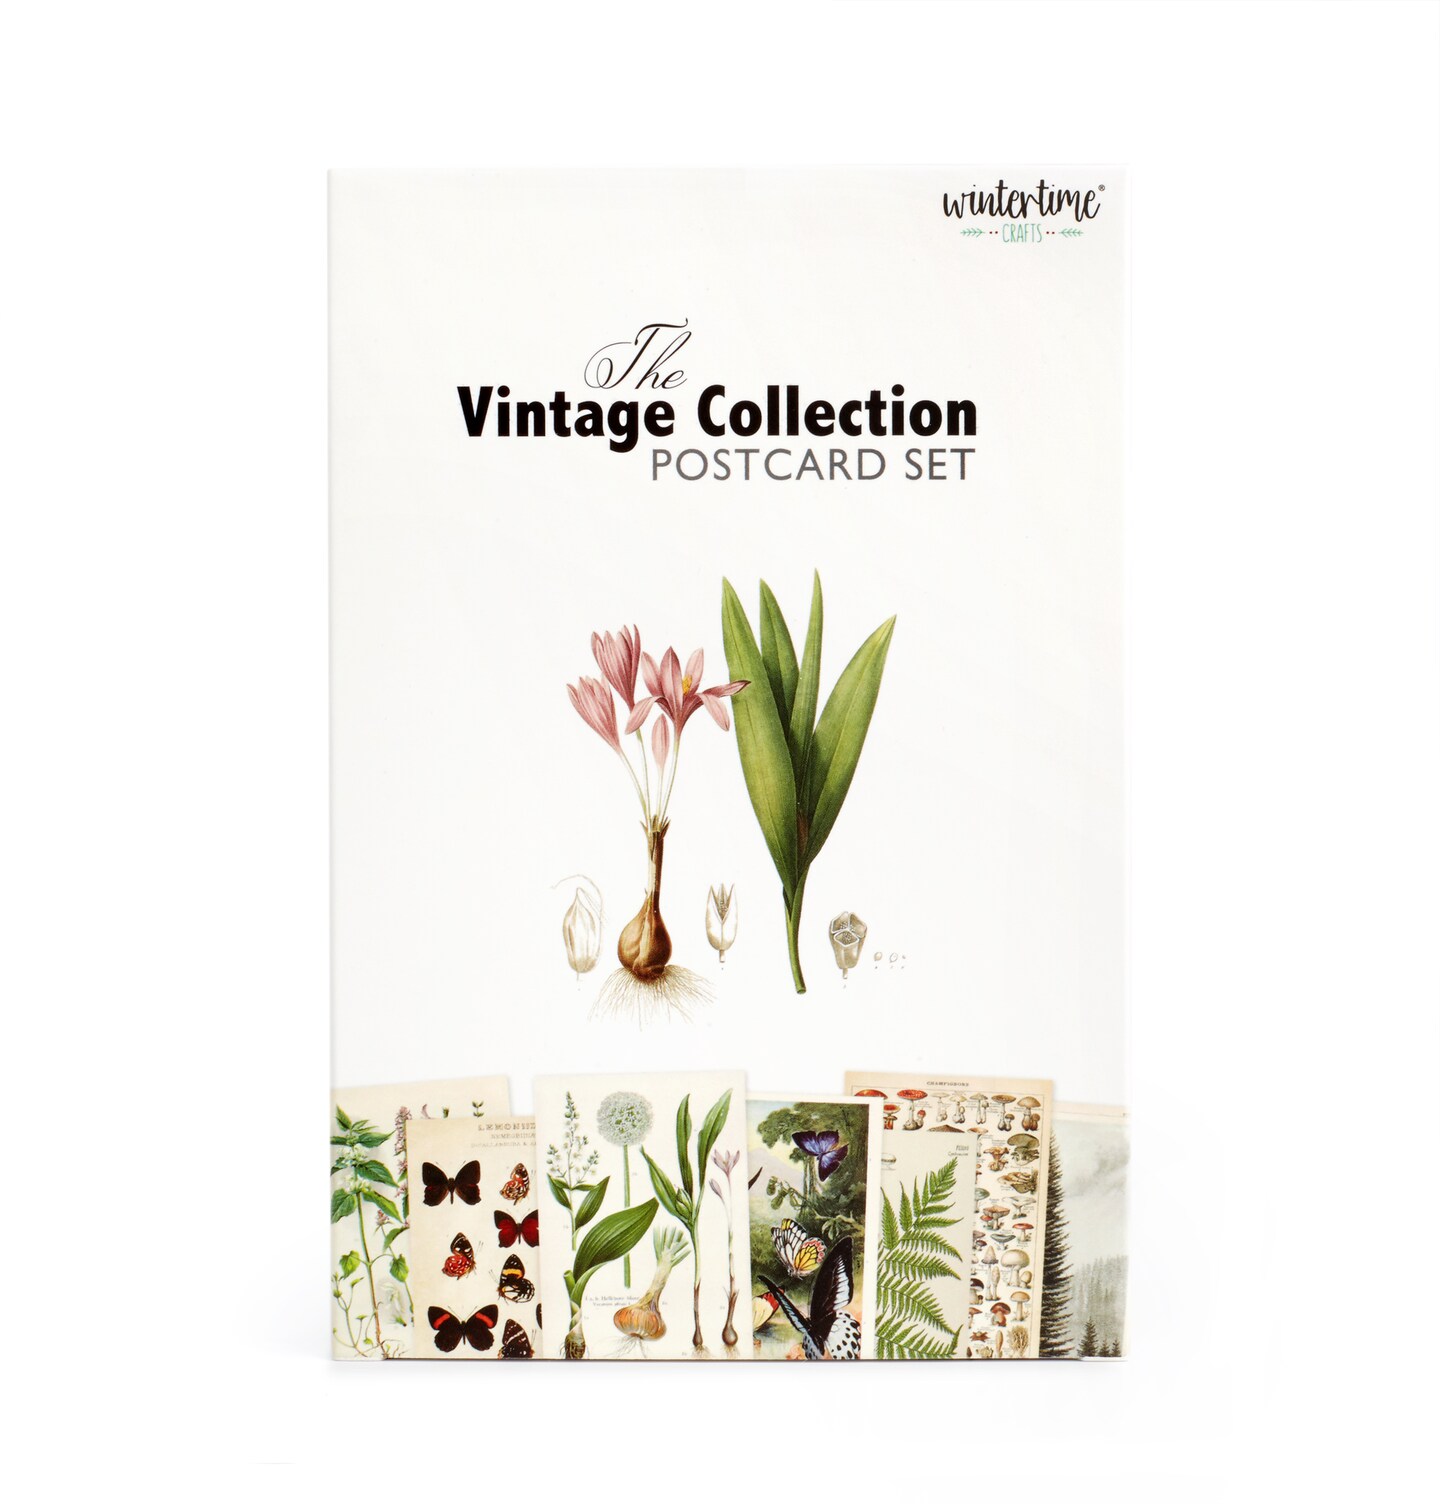 Vintage Collection Postcard Set: Pack of 30 Retro Style Botanical, Nature and Ephemera Postcards by Wintertime Crafts